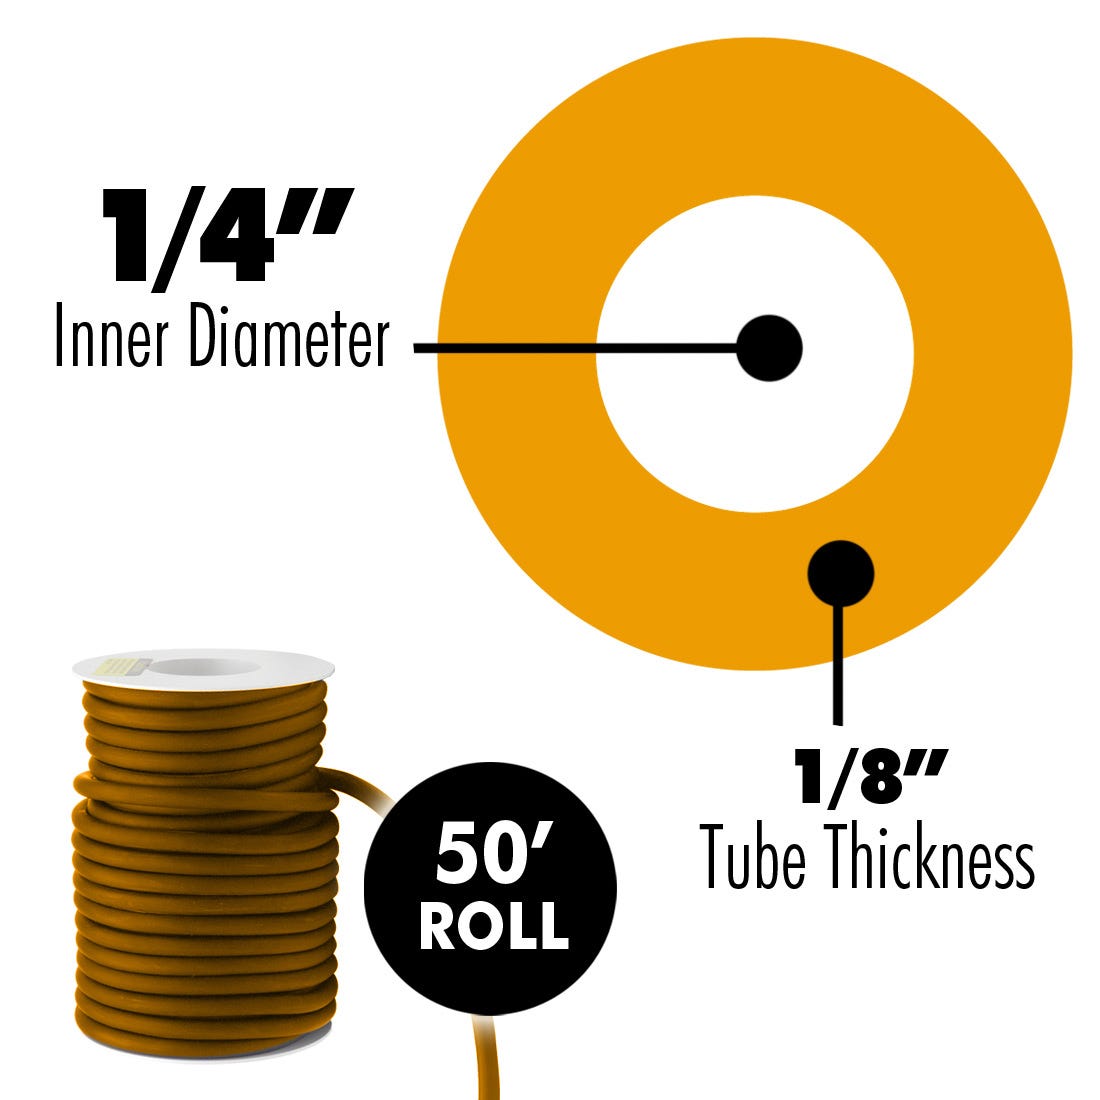 ACE Latex Rubber Tubing Amber ,1/4" x 1/8"- 50' Roll